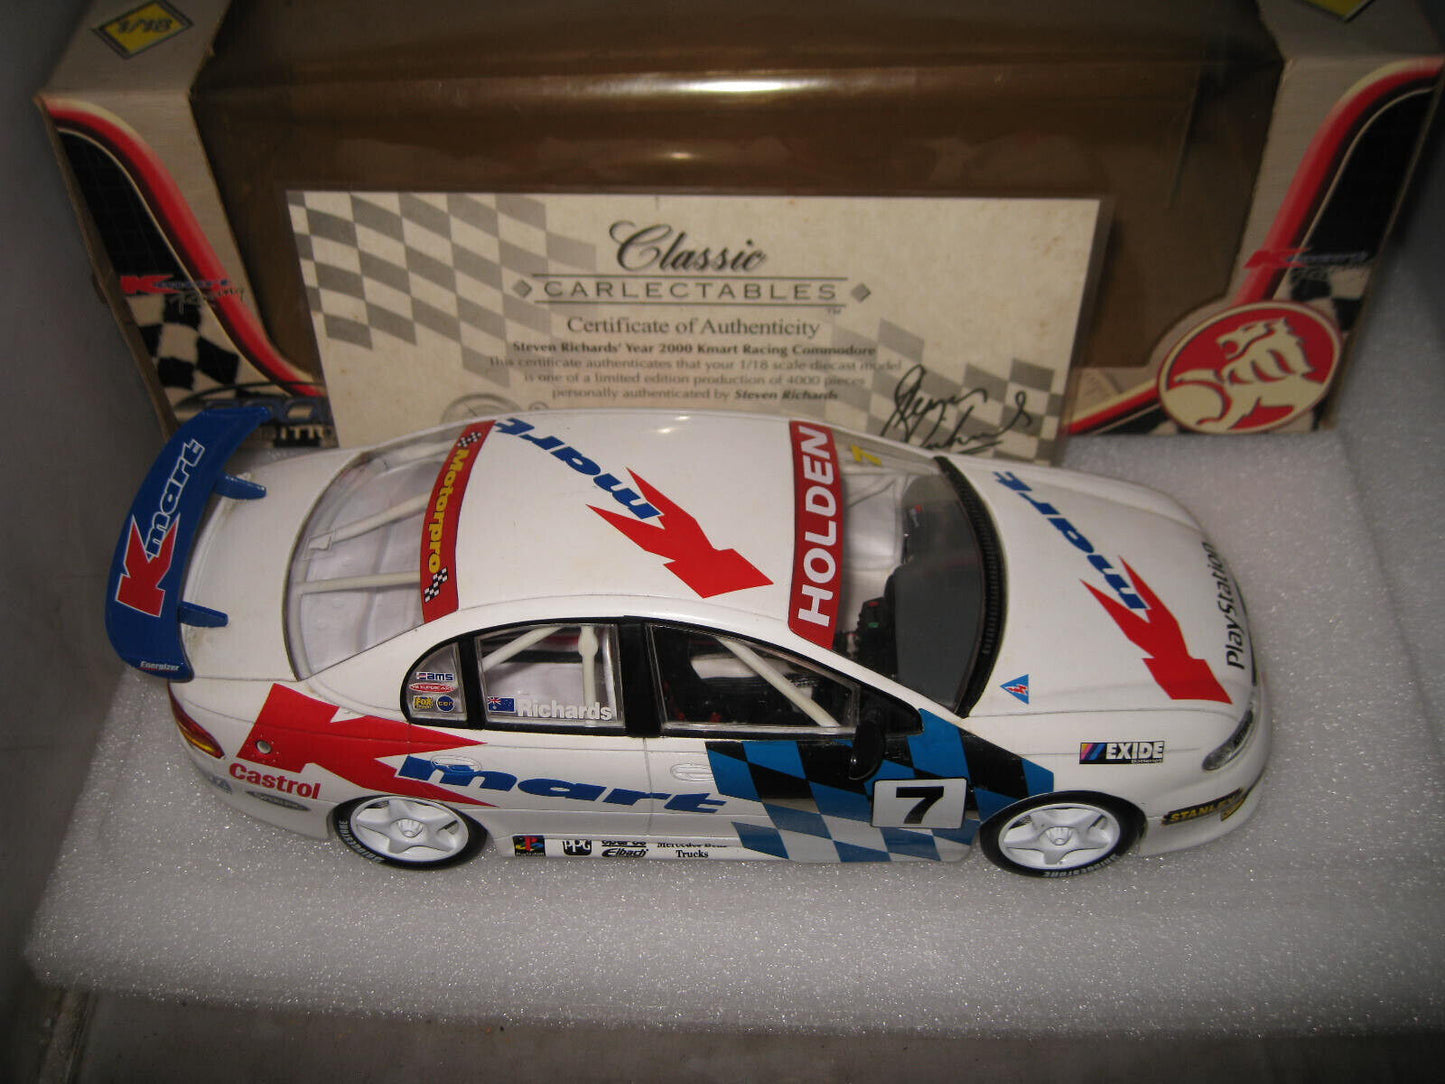 EARLY CLASSIC 1/18 HOLDEN COMMODORE STEVEN RICHARDS KMART RACING 2000 #7 #18008